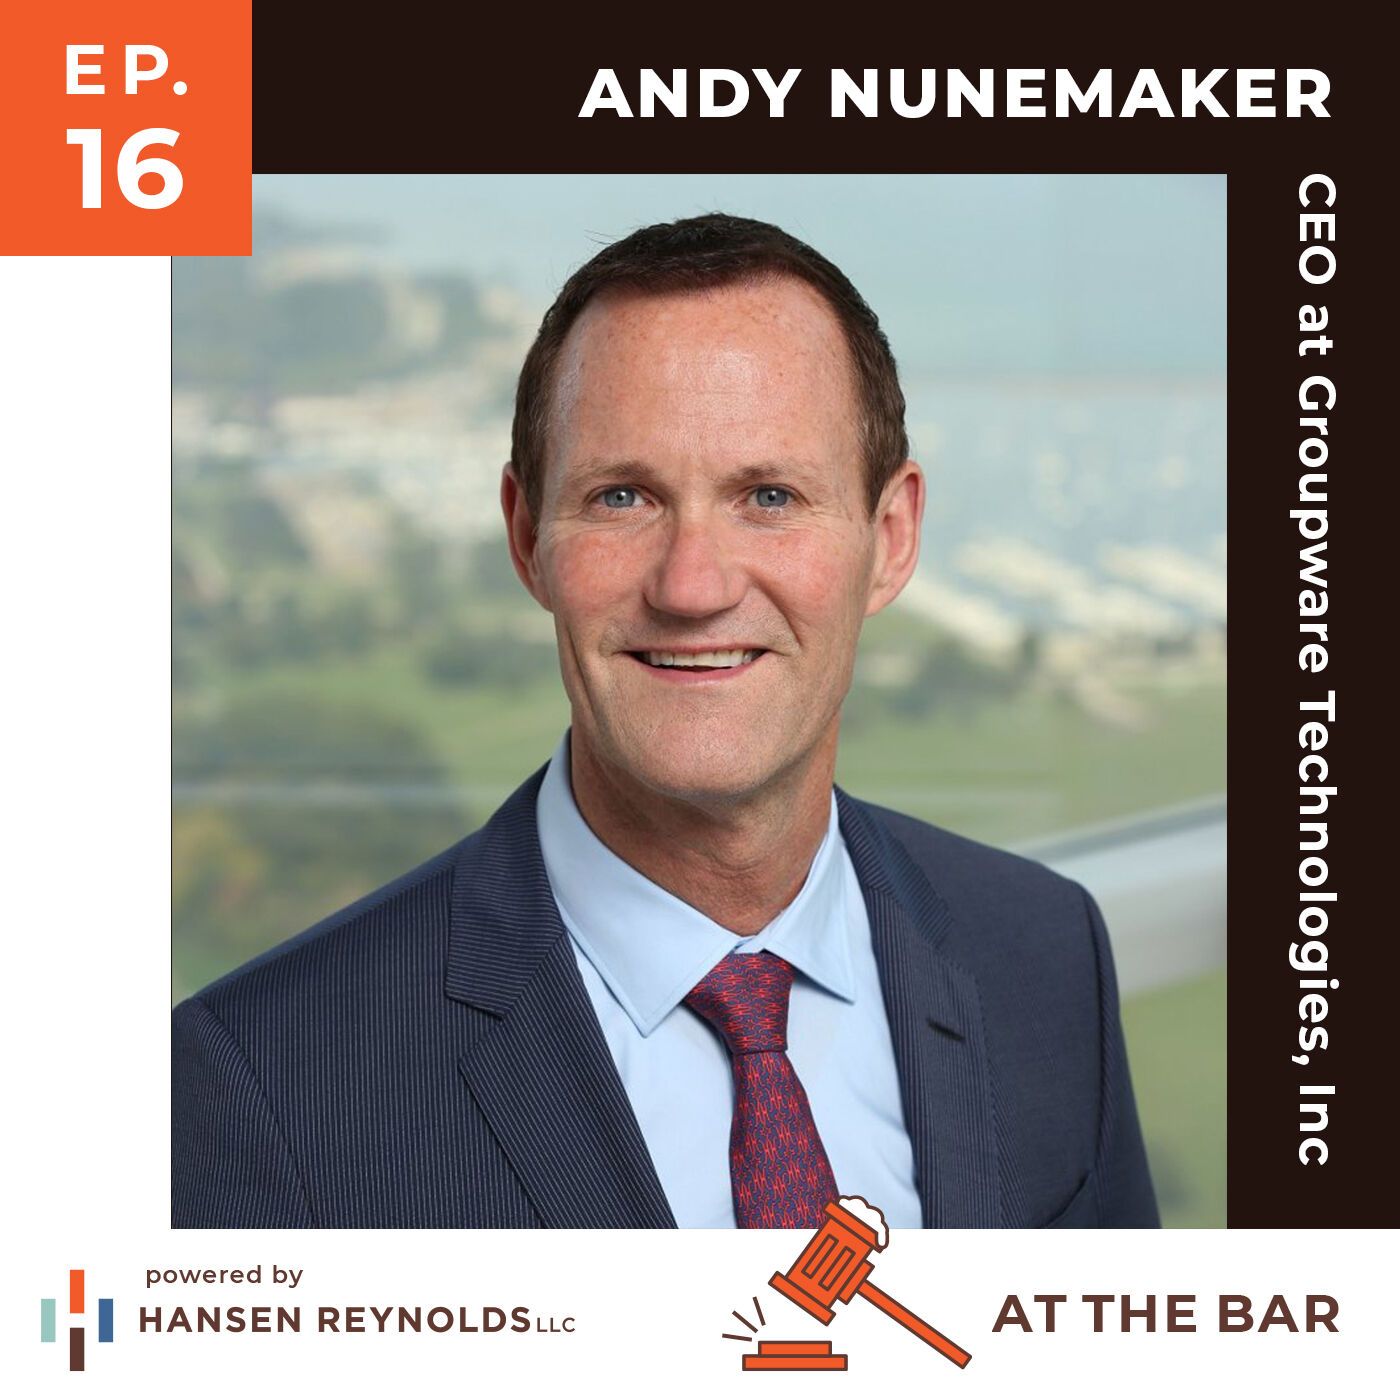 At the Bar episode sixteen cover with Andy Nunemaker